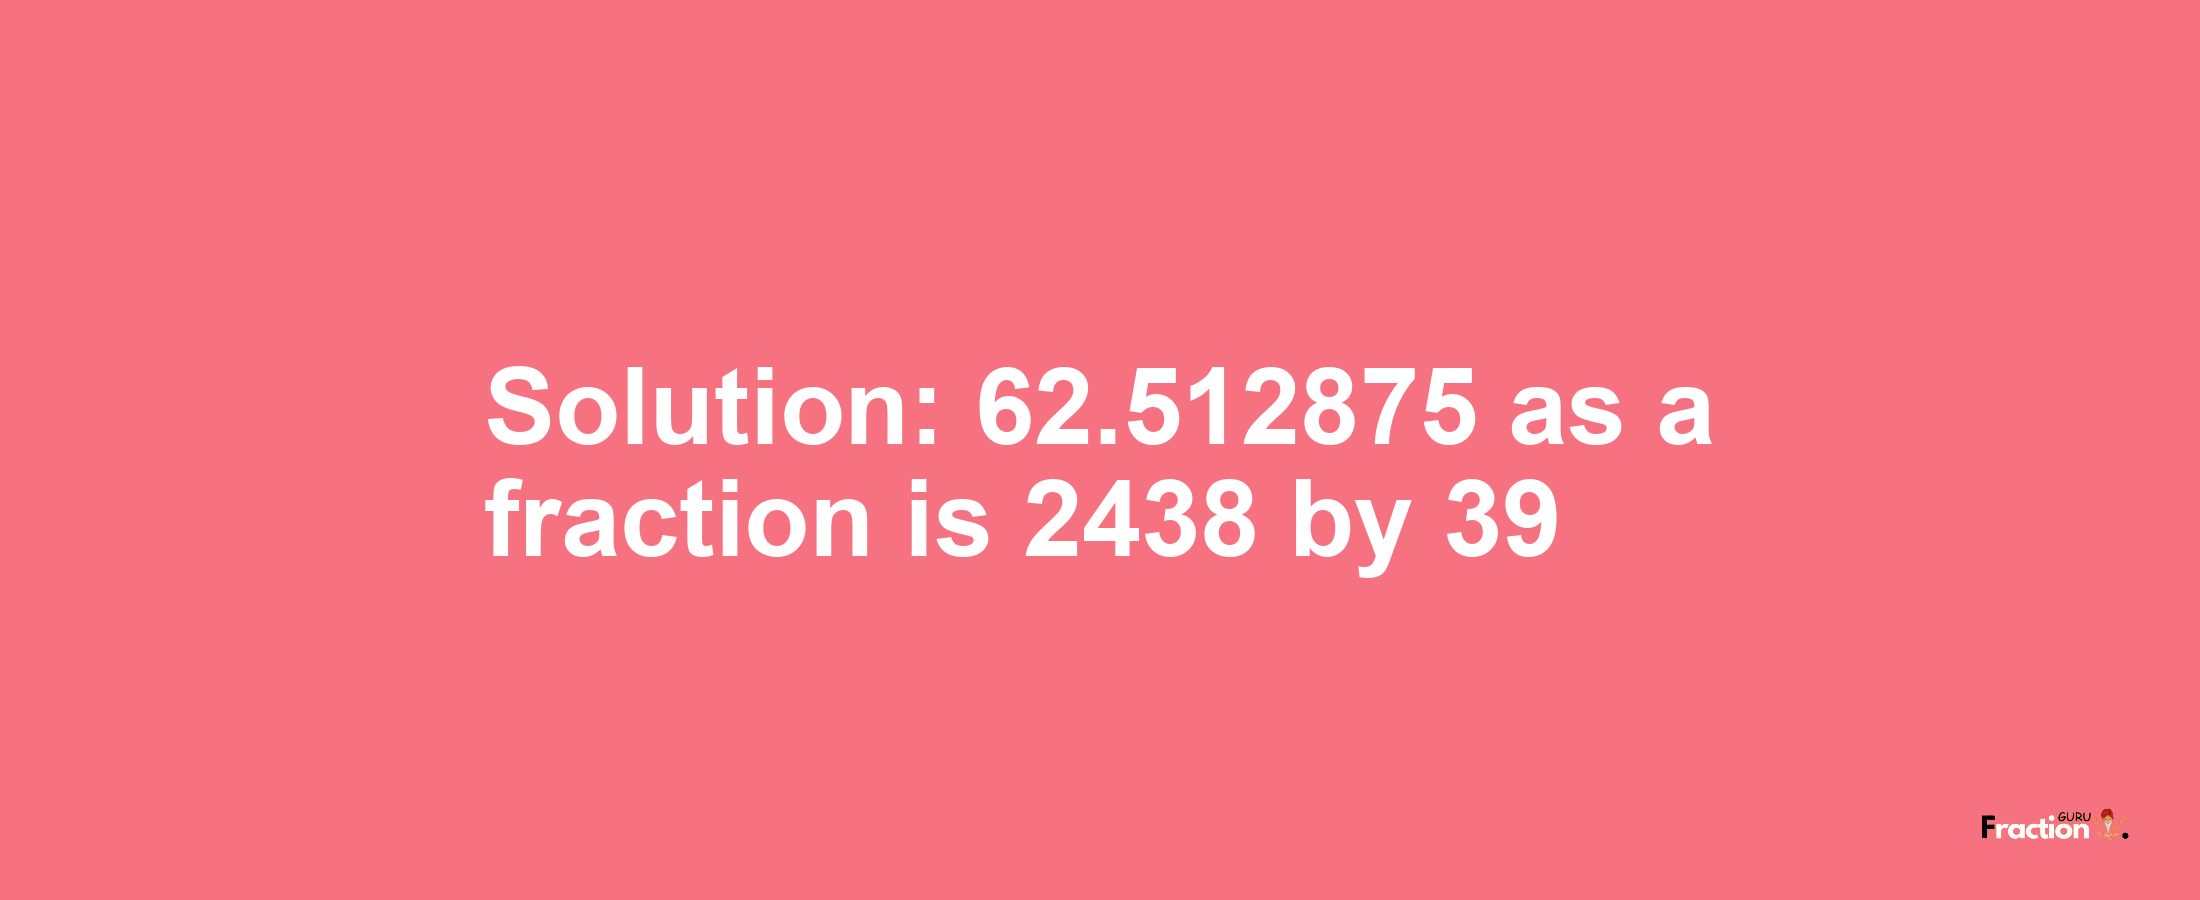 Solution:62.512875 as a fraction is 2438/39